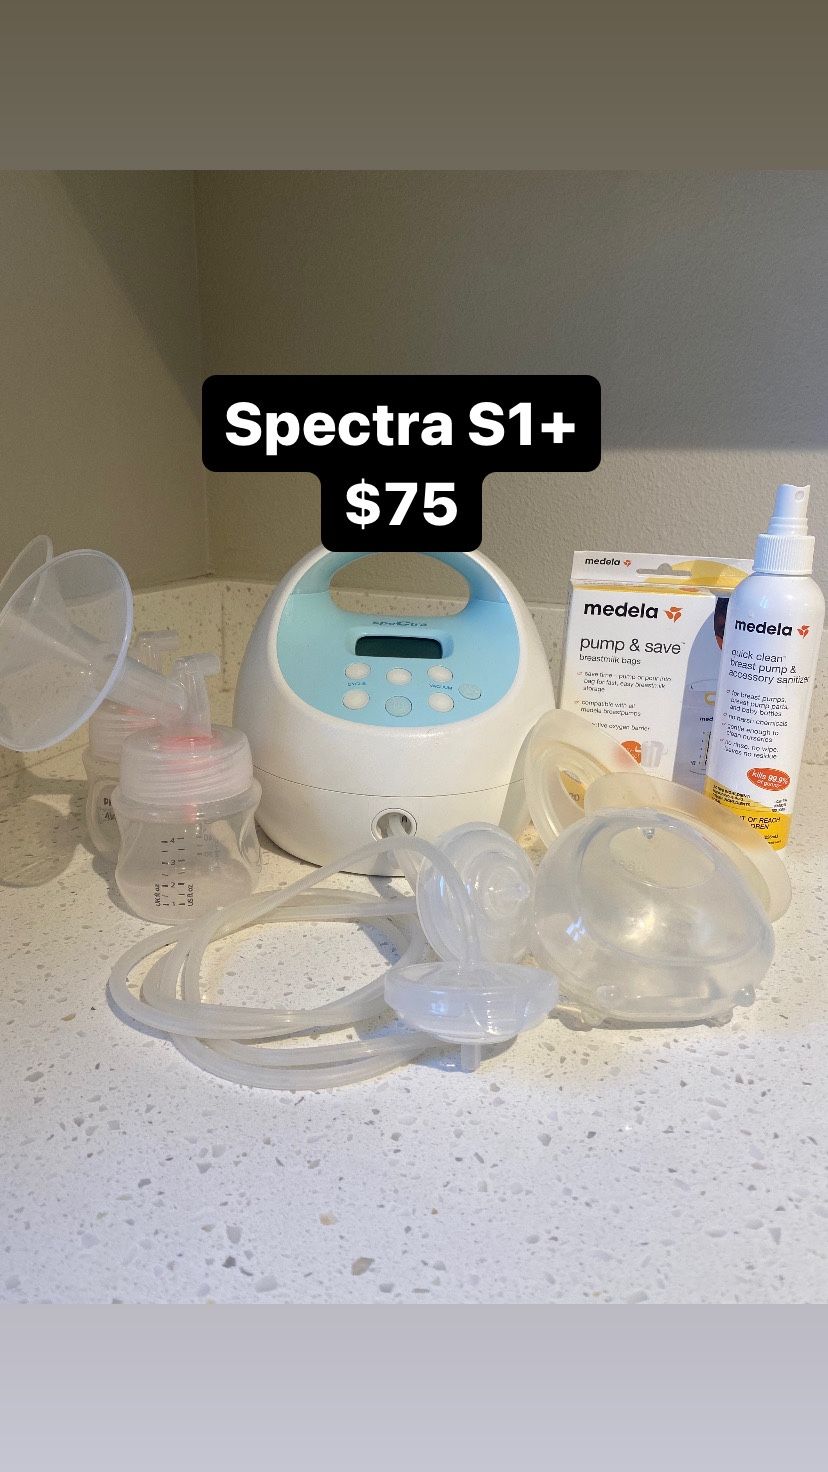 Spectra S1 Rechargeable Breast Pump